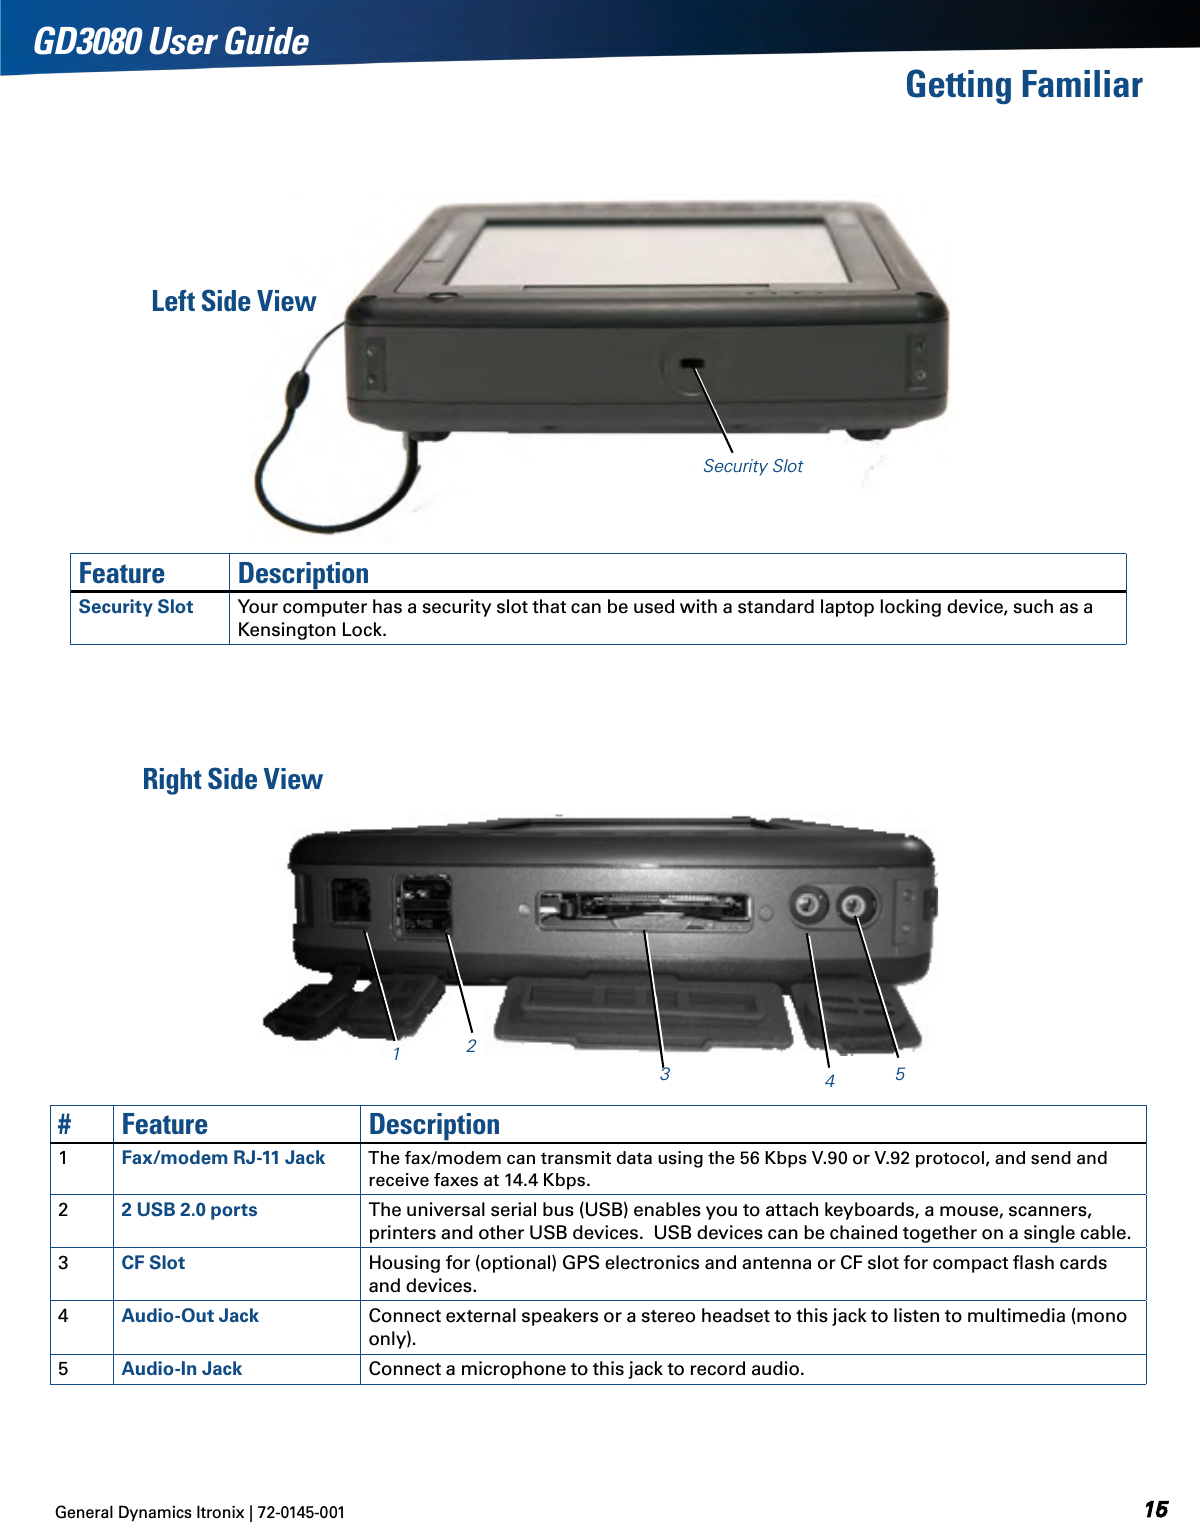 General Dynamics Itronix | 72-0145-001GD3080 User GuideGetting FamiliarFeature DescriptionSecurity Slot Your computer has a security slot that can be used with a standard laptop locking device, such as a Kensington Lock.#Feature Description1Fax/modem RJ-11 Jack The fax/modem can transmit data using the 56 Kbps V.90 or V.92 protocol, and send and receive faxes at 14.4 Kbps.22 USB 2.0 ports The universal serial bus (USB) enables you to attach keyboards, a mouse, scanners, printers and other USB devices.  USB devices can be chained together on a single cable.3CF Slot Housing for (optional) GPS electronics and antenna or CF slot for compact ﬂash cards and devices.4Audio-Out Jack Connect external speakers or a stereo headset to this jack to listen to multimedia (mono only).5Audio-In Jack Connect a microphone to this jack to record audio.Left Side ViewSecurity Slot12345Right Side View